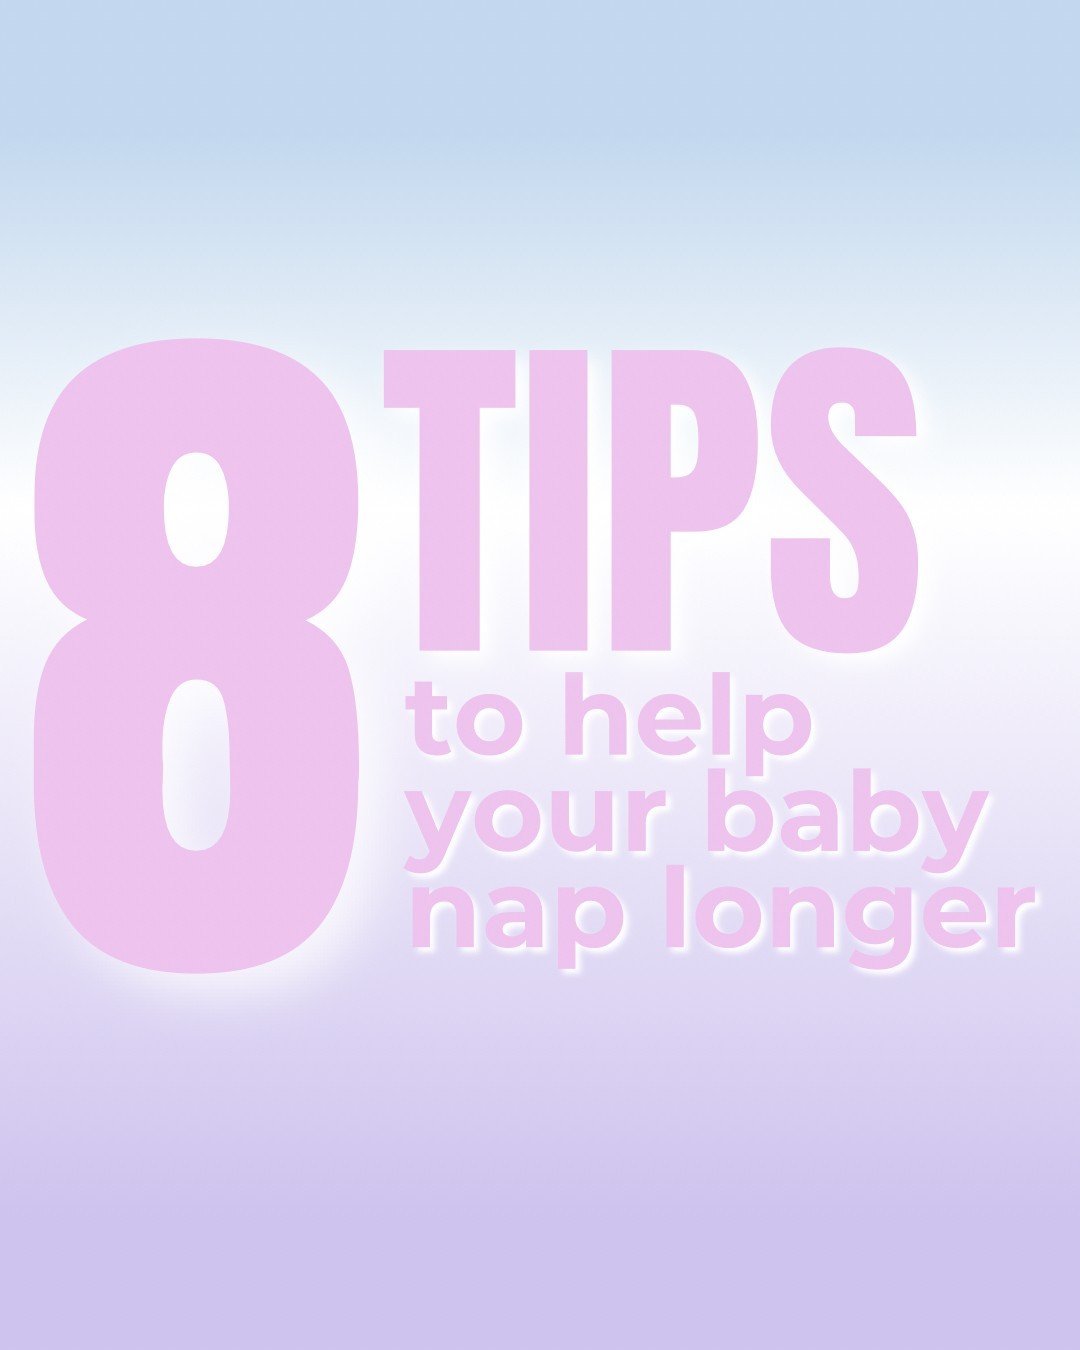 Feel like you have tried it all to get your baby to nap longer but the short naps just keep cycling?
 
Here are some more quick tips:

🤍 Have the room DARK. You shouldn&rsquo;t be able to see around the room.

🤍 Use white noise to filter out distra